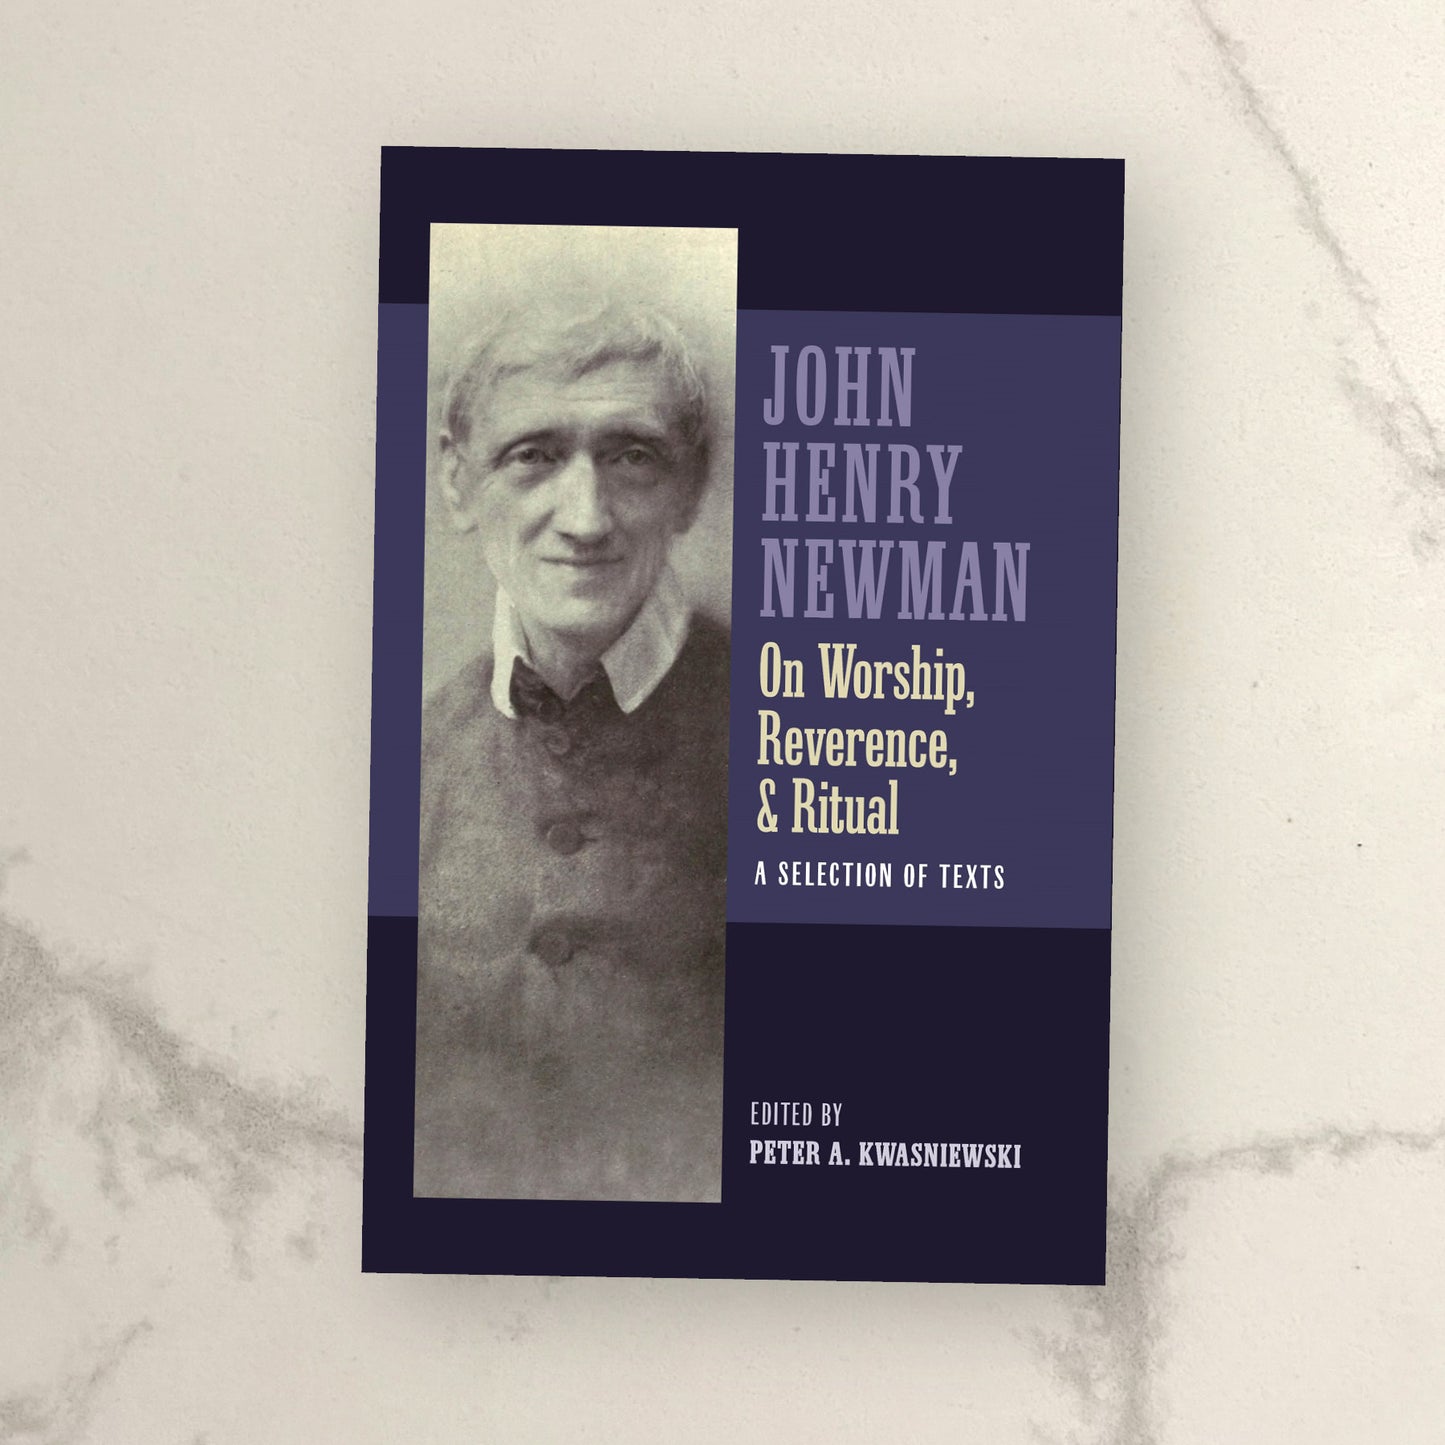 John Henry Newman on Worship, Reverence, & Ritual: A Selection of Texts